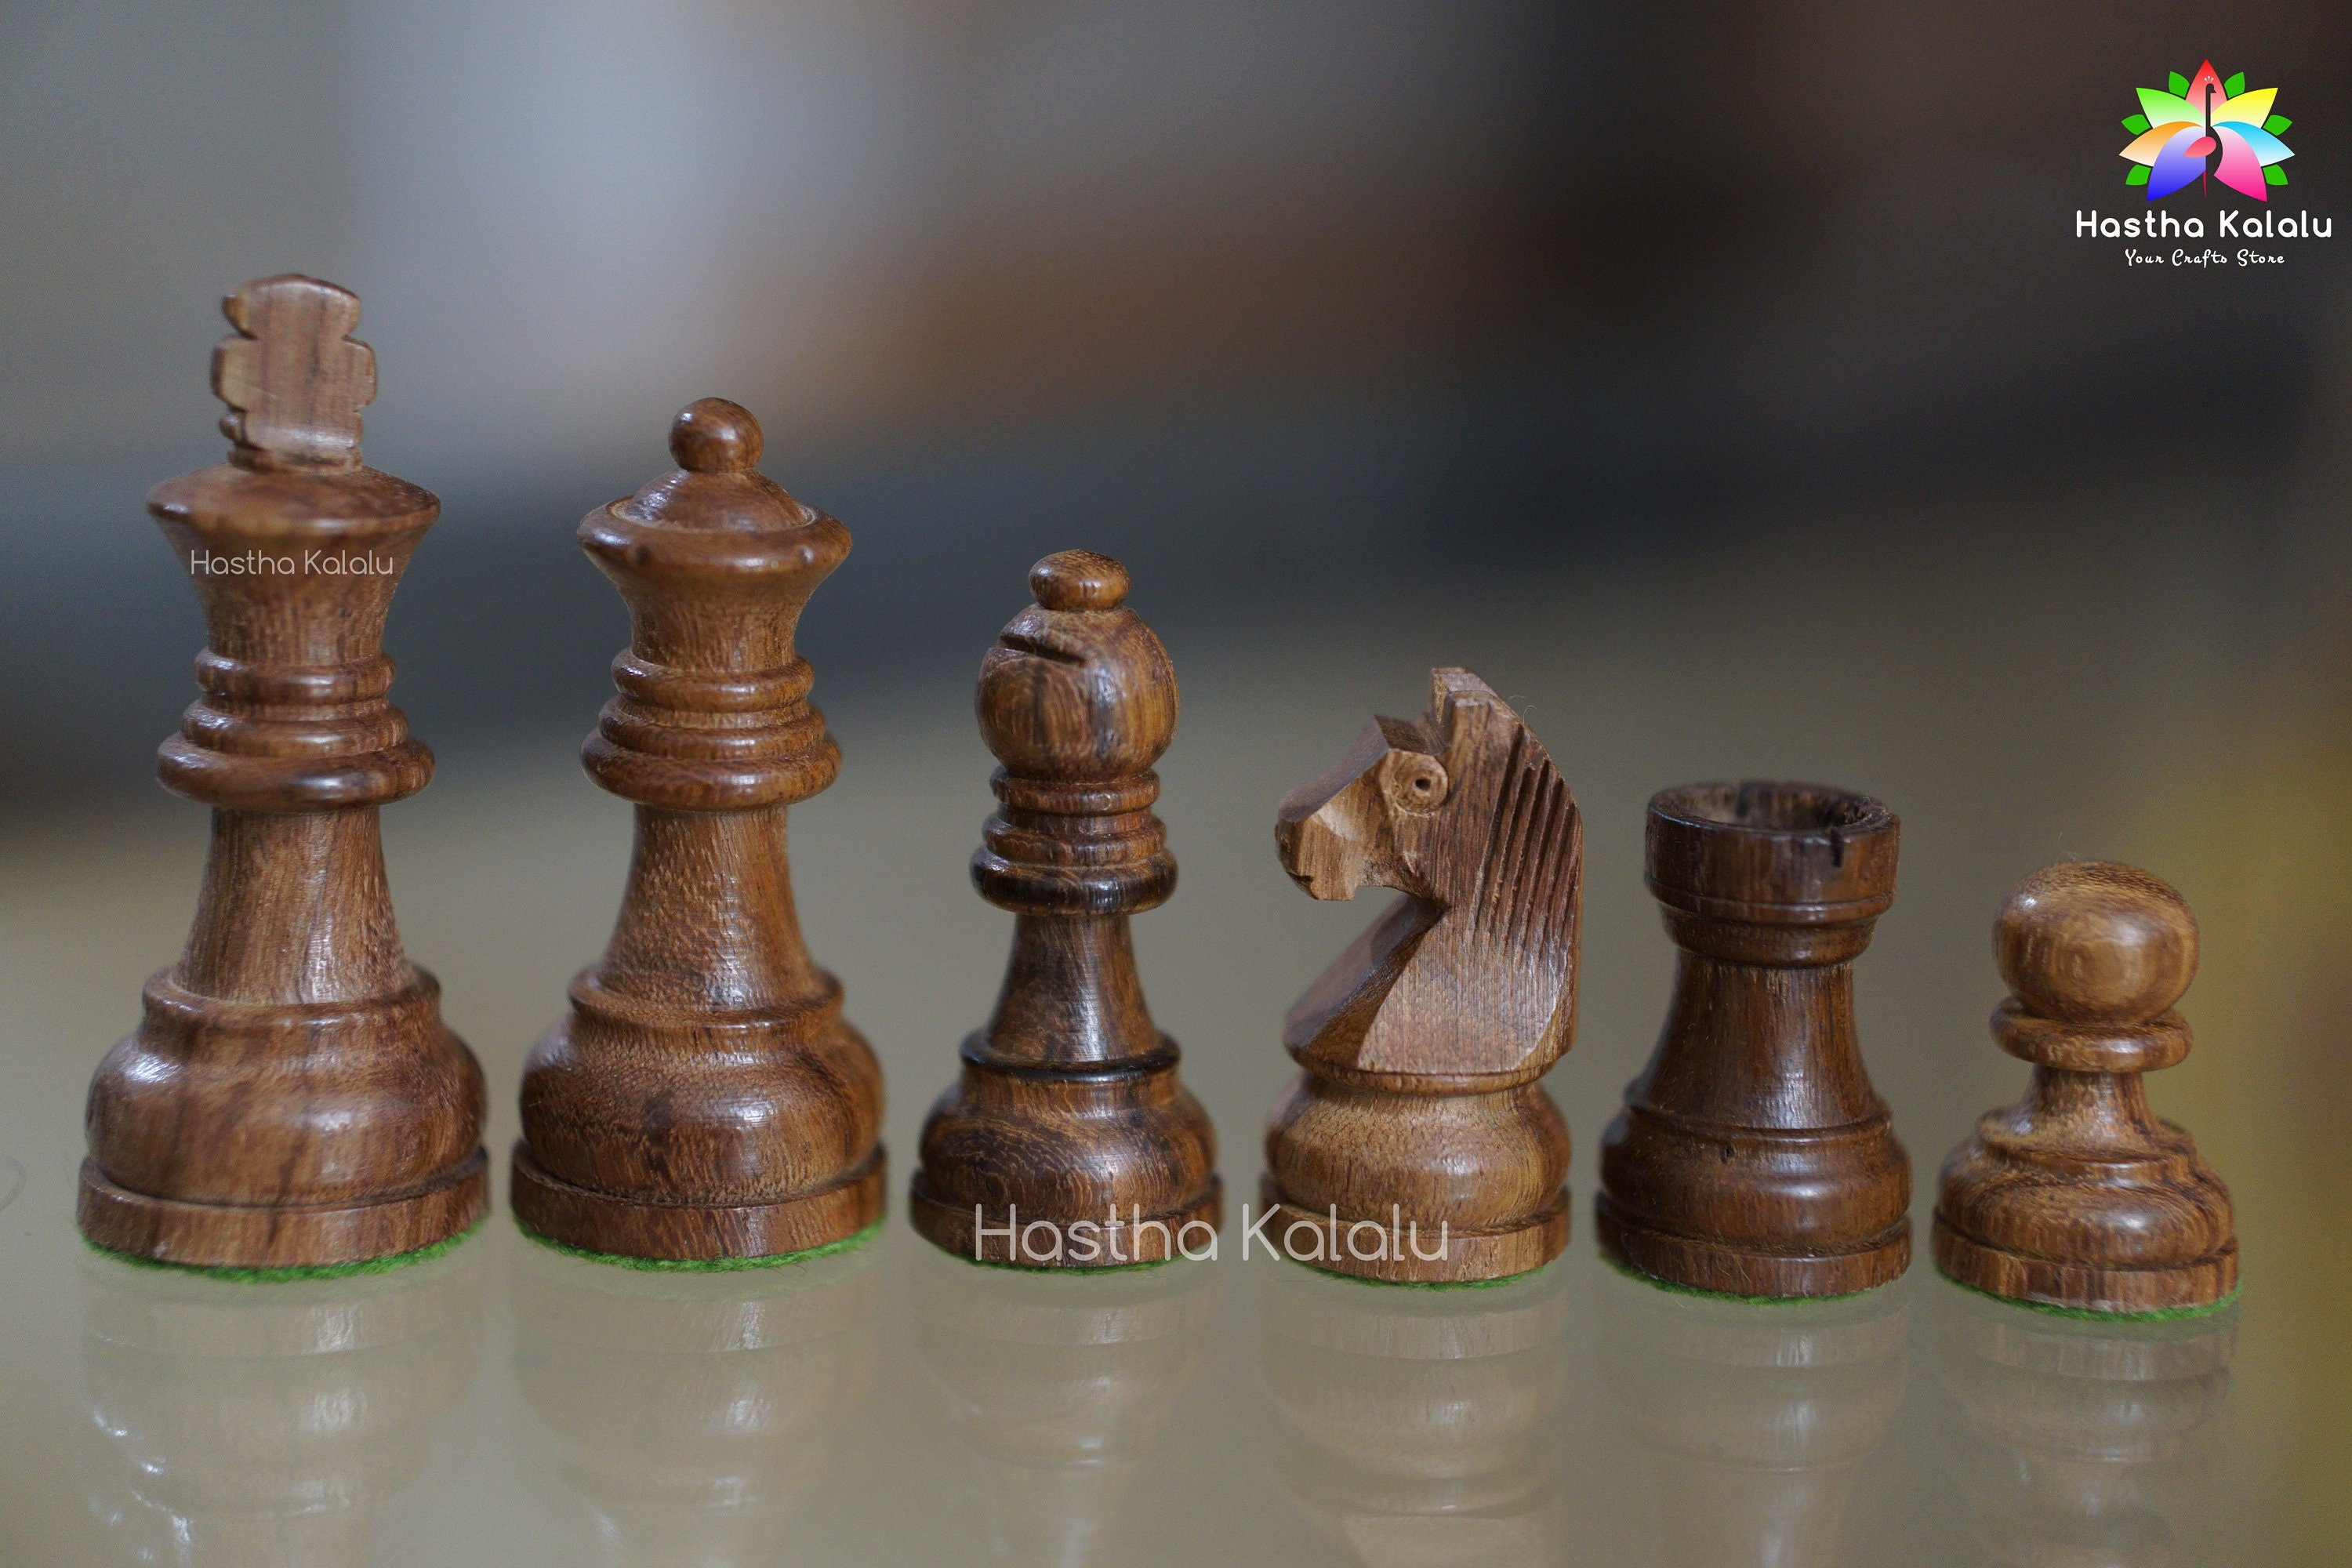 3" King, German Knight Staunton Style/ Tournament Series Sheesham/ Indian Rosewood Chess Pieces, Weighted